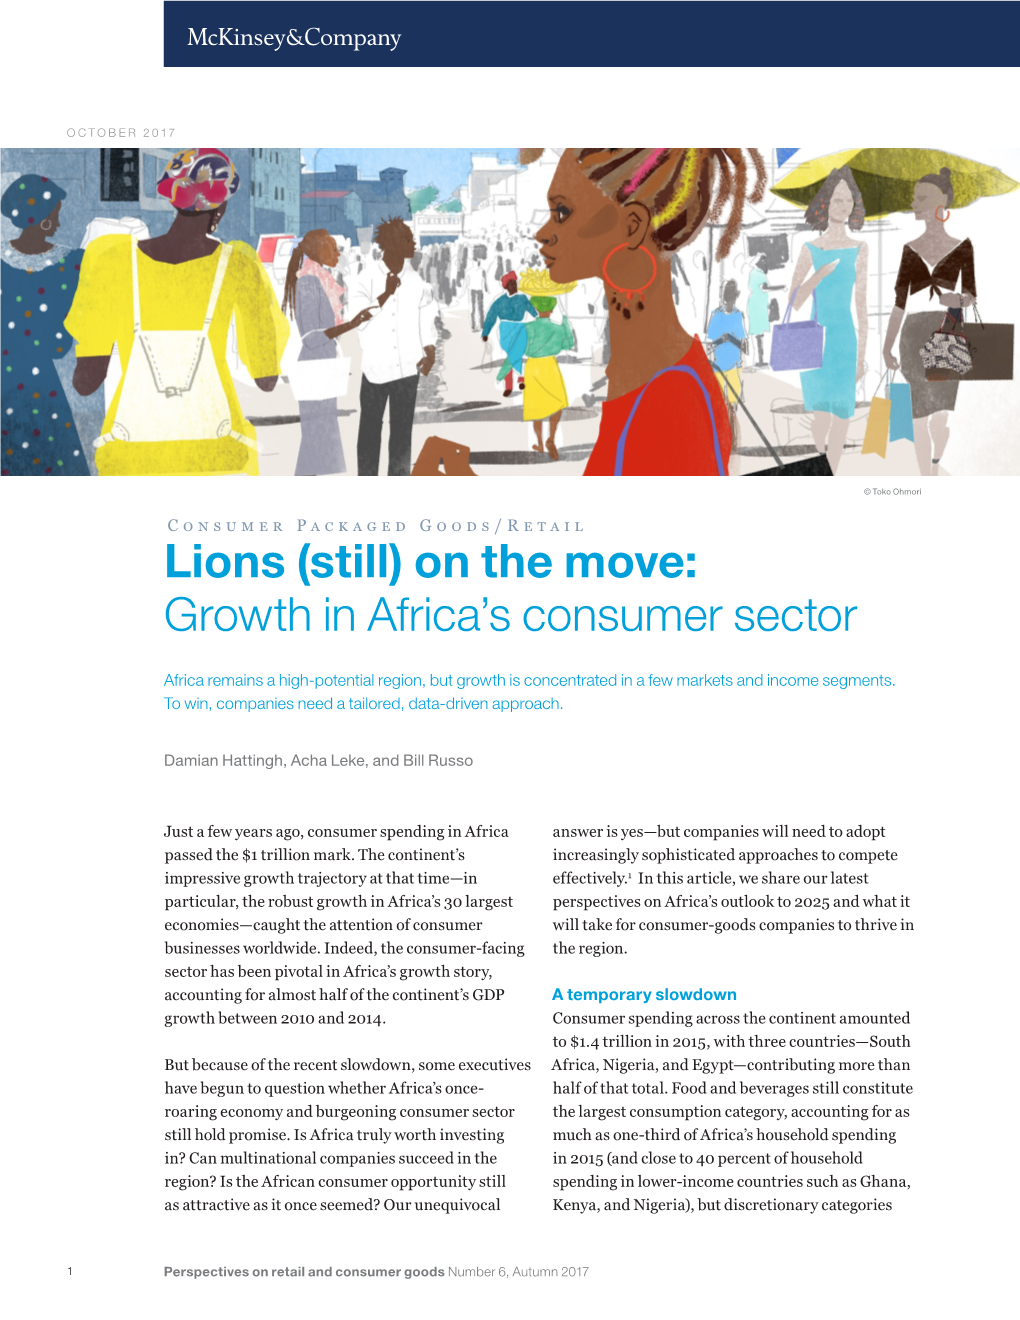 Lions (Still) on the Move: Growth in Africa's Consumer Sector